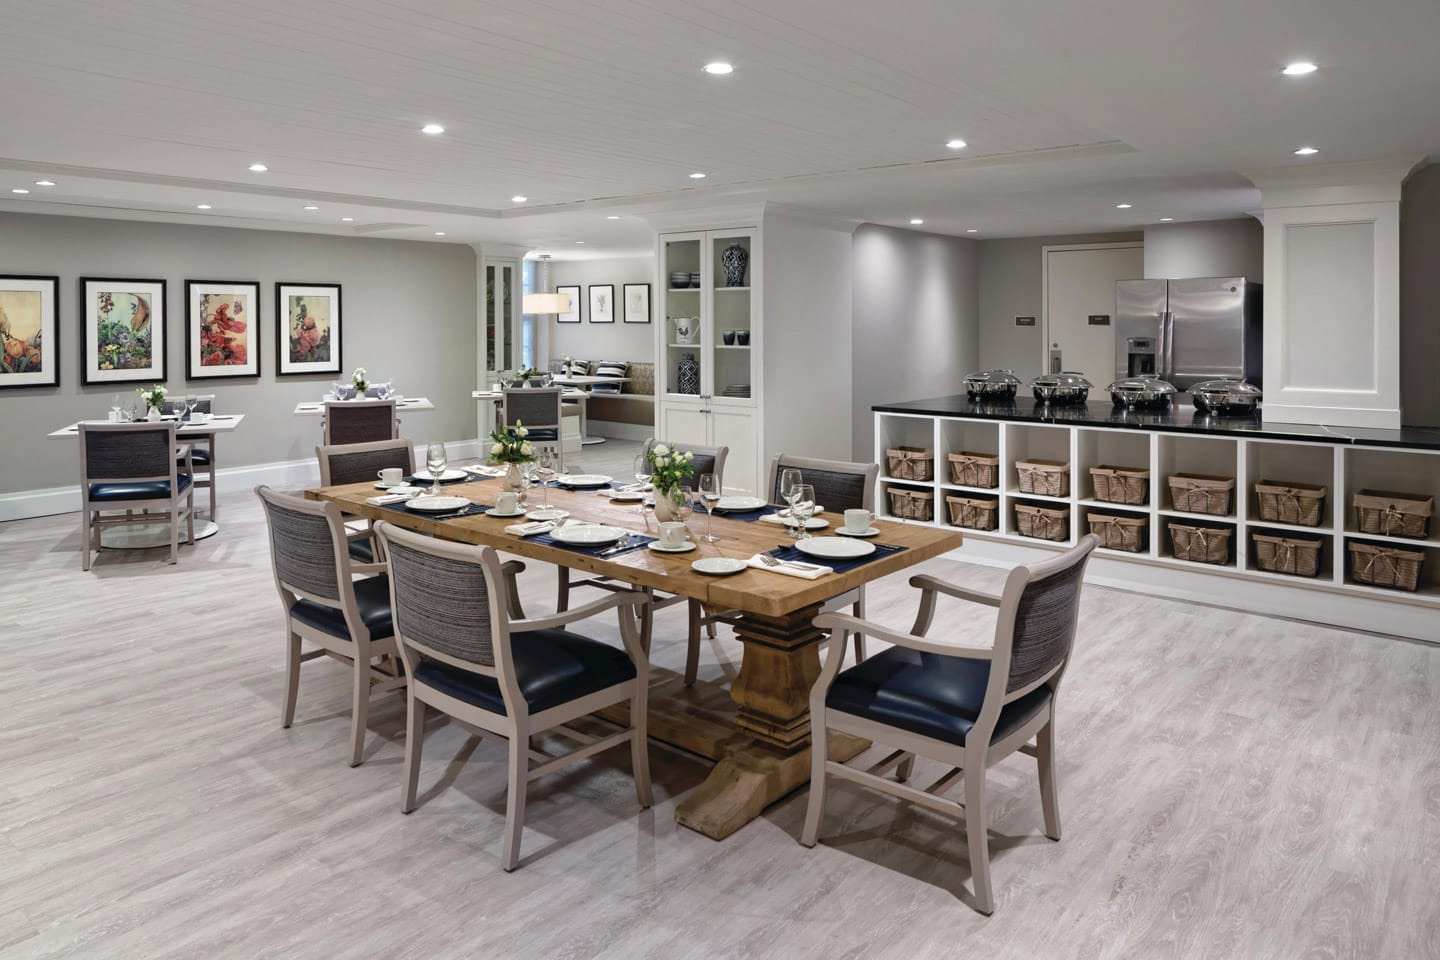 Memory Care Photo Gallery - A communal dining space ideal for Memory Care residents and their loved ones to enjoy a quiet meal during visits.